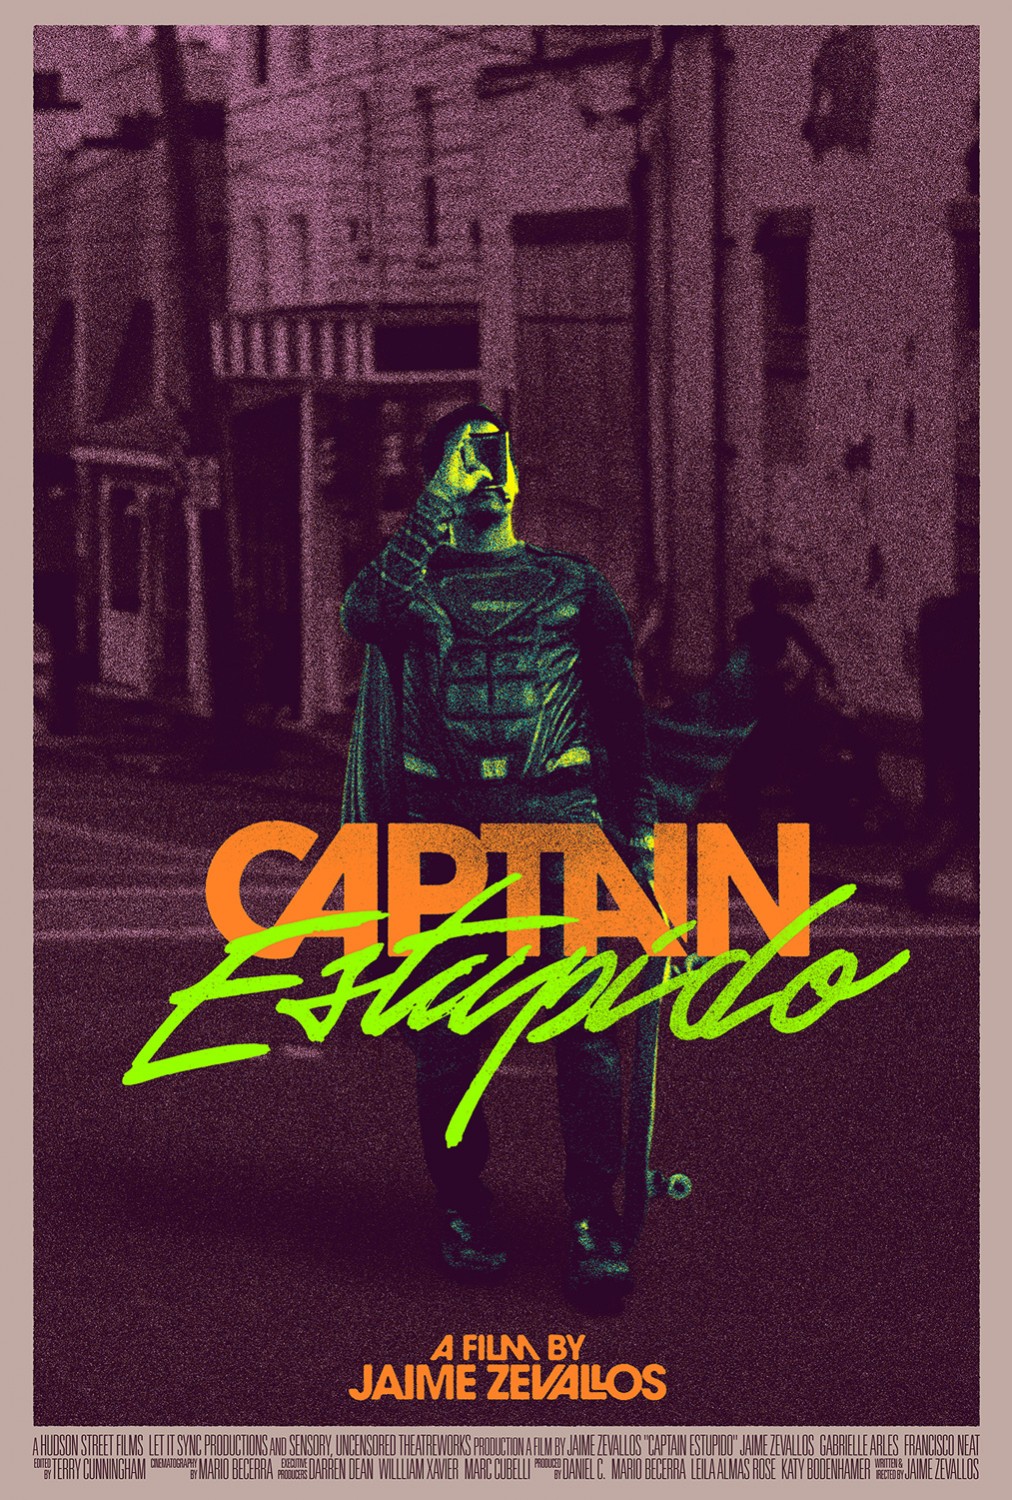 Extra Large Movie Poster Image for Captain Estupido